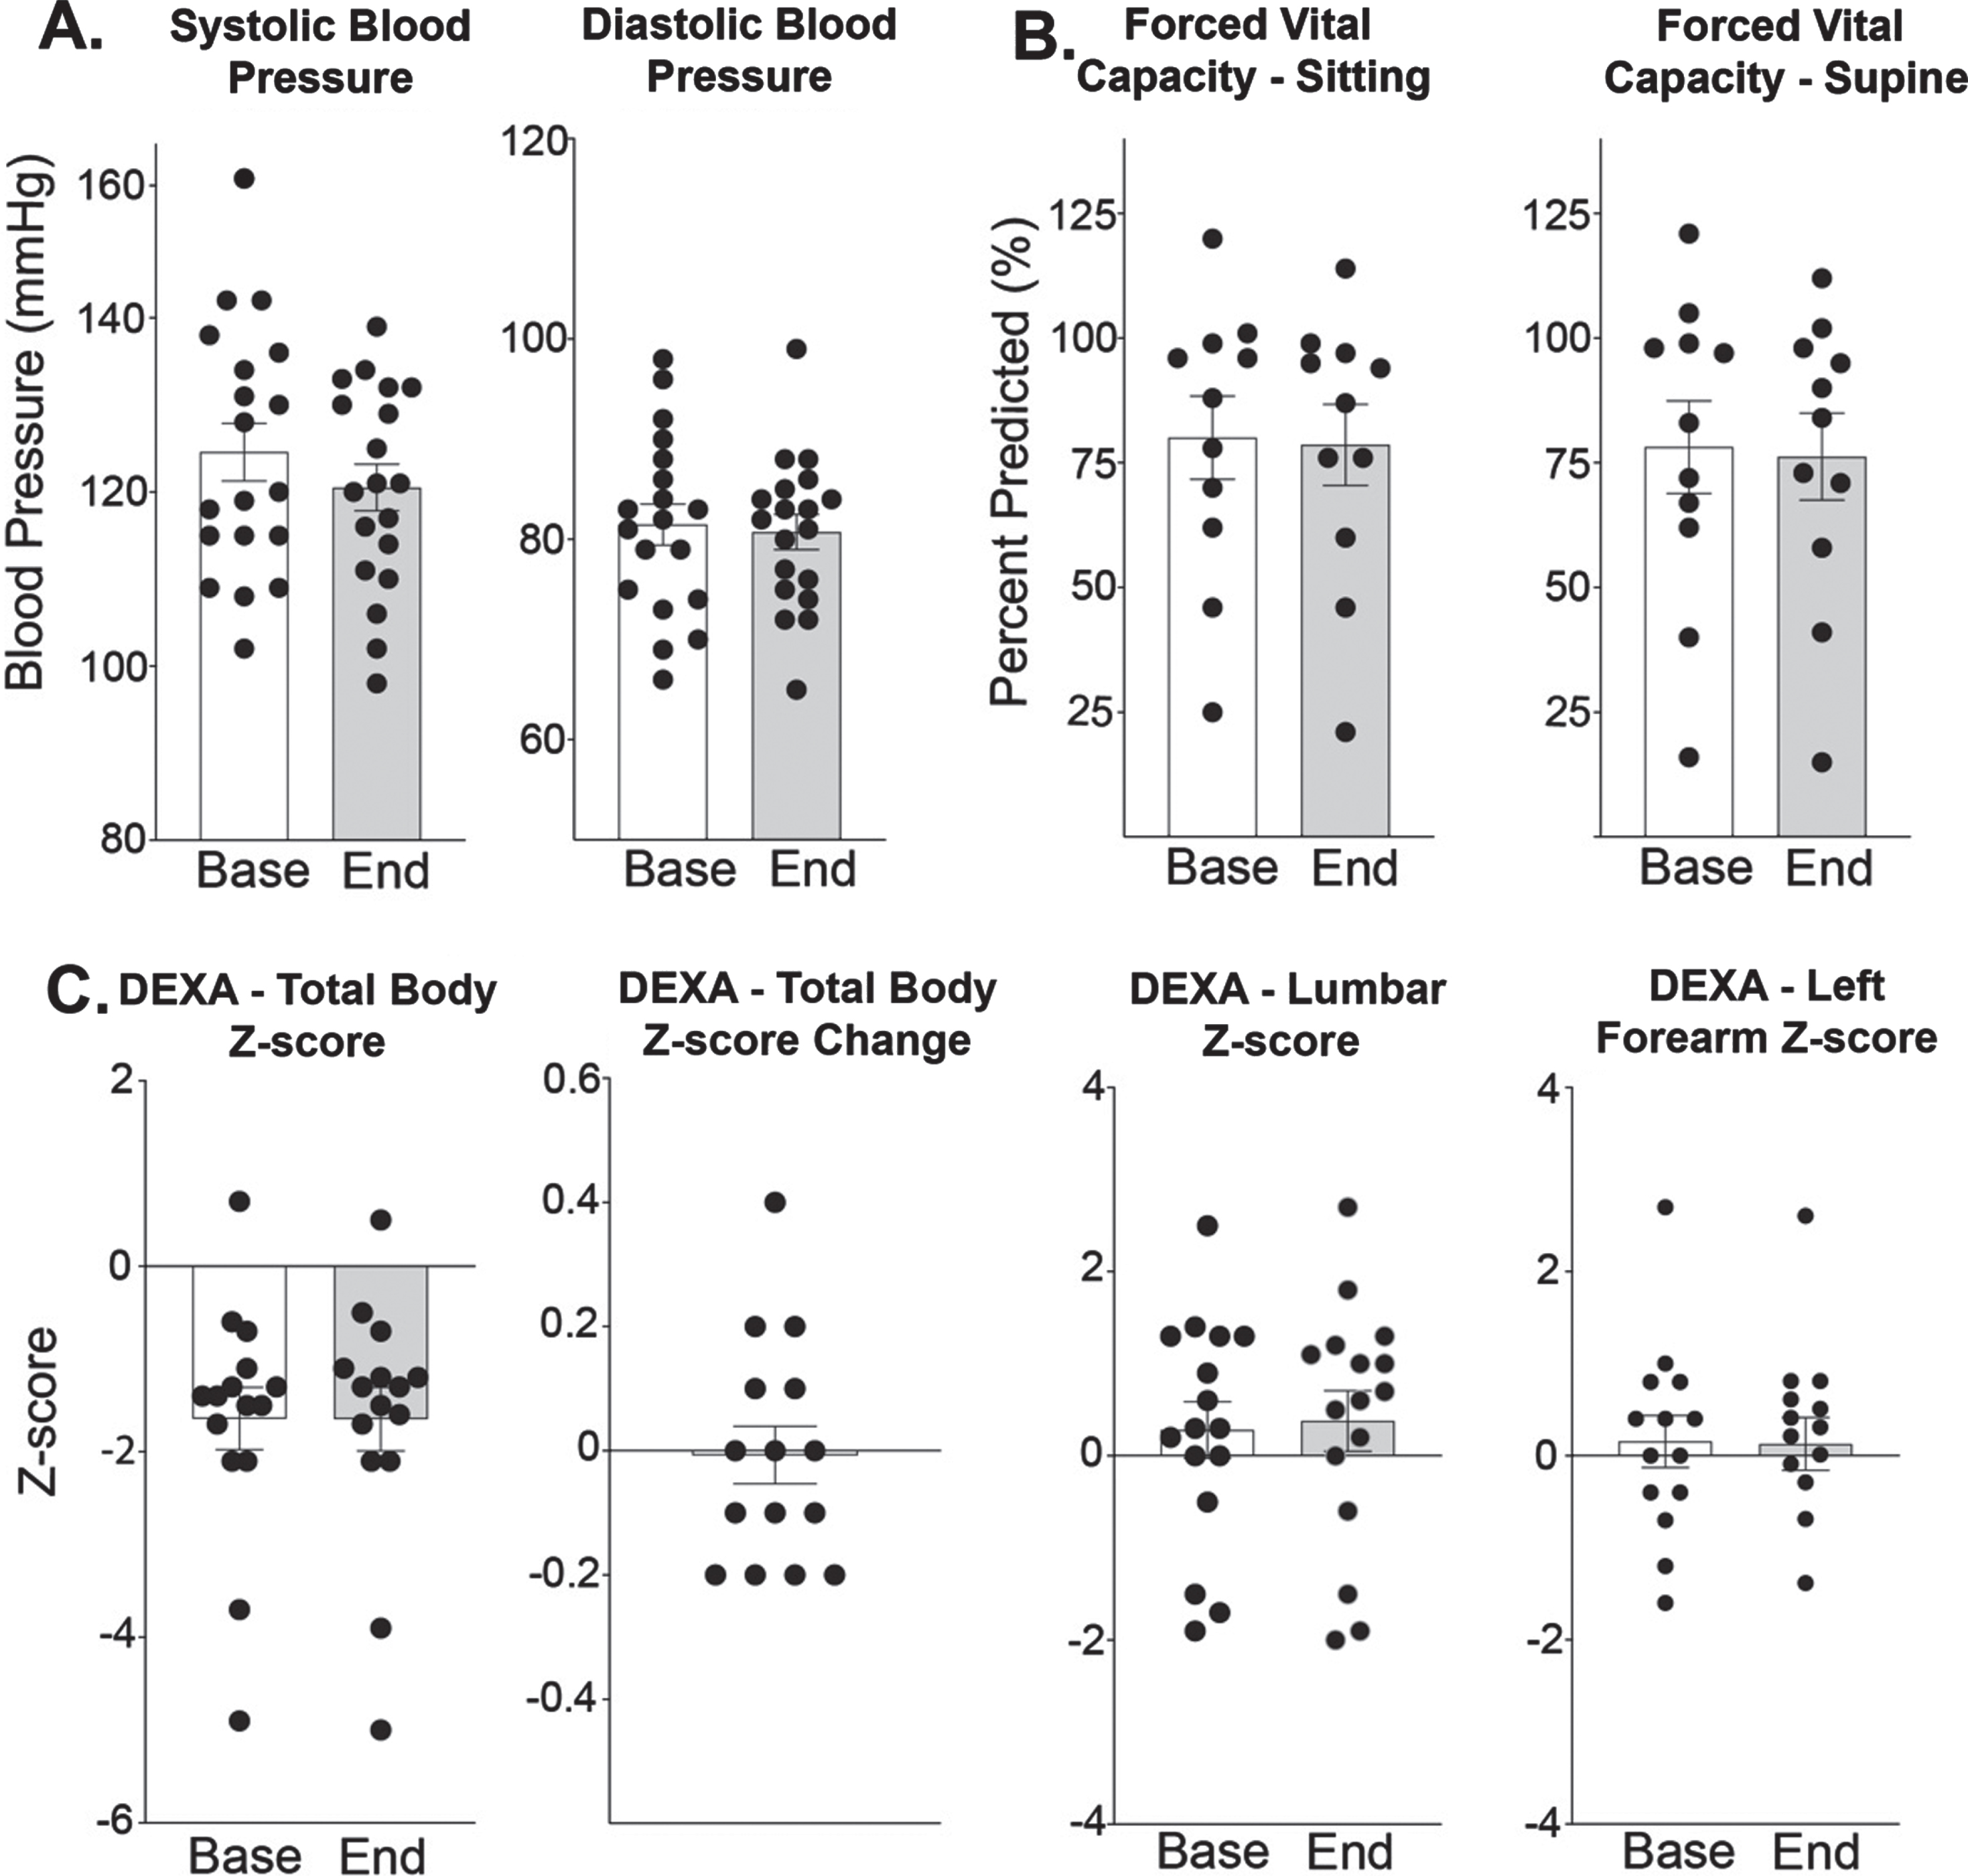 Weekly steroids over 6-month period do not significantly alter blood pressure, respiratory function, or bone density. (A) Systolic and diastolic blood pressure did not significantly increase. (B) Respiratory capacity remained stable in both the supine and sitting positions. (C) Total body bone density Z-score remained stable from –1.64 (±0.33) to –1.65 (±0.34) (n = 15, p = 0.828). Lumbar Z-scores were determined from L1–L4 and at study onset was 0.28 (±0.31) compared to 0.38 (±0.33) at study end (n = 16, p = 0.471). Left forearm Z-score remained stable from 0.16 (±0.28) to 0.13 (±0.29) (n = 15, p = 0.957). Histograms depict single values and mean +/- SEM; *P < 0.05 vs baseline; paired t-test, nonparametric, Wilcoxon matched-pairs signed rank test.